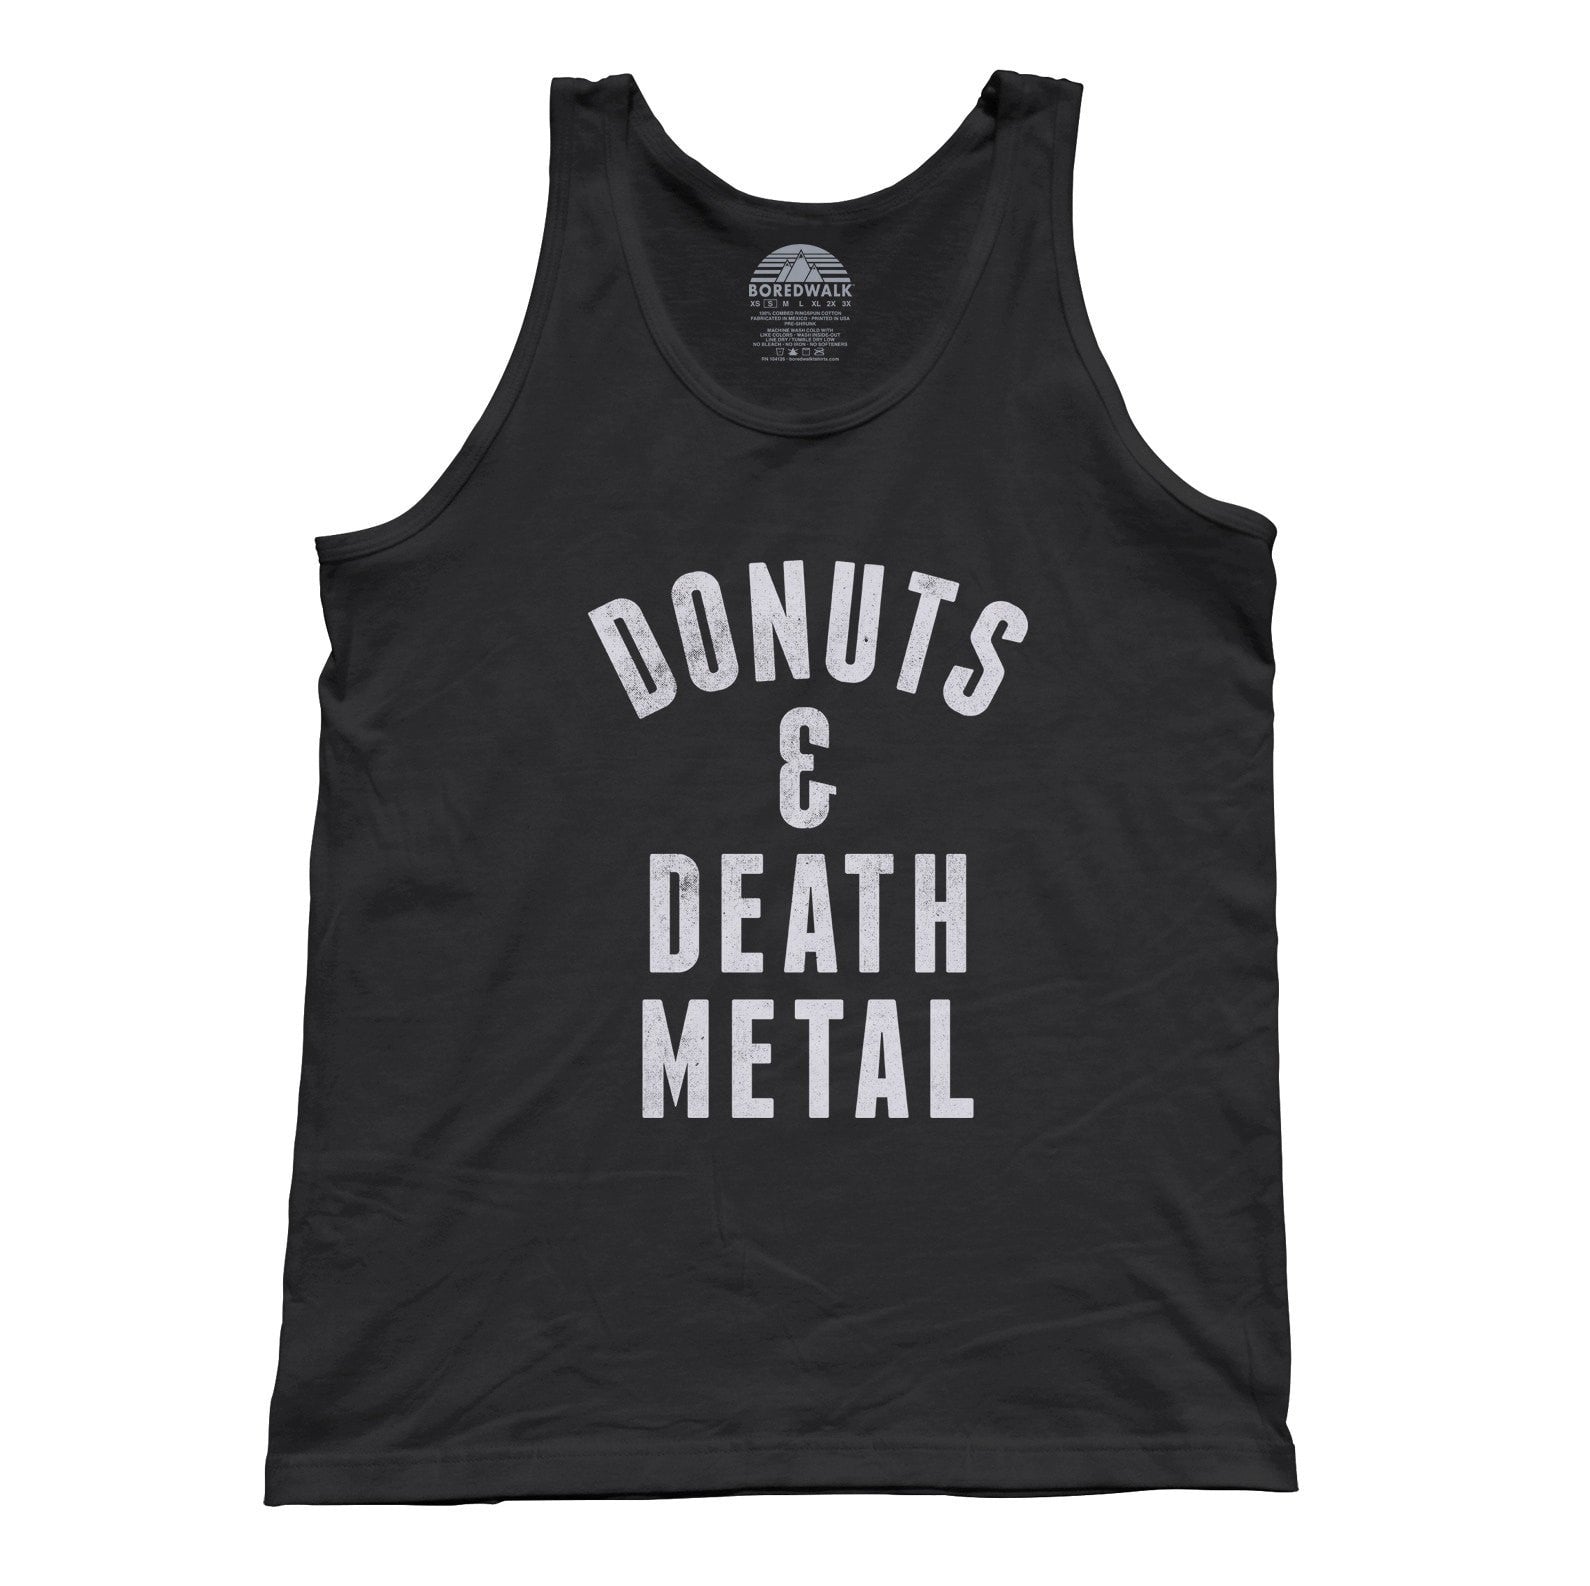 Unisex Donuts and Death Metal Tank Top